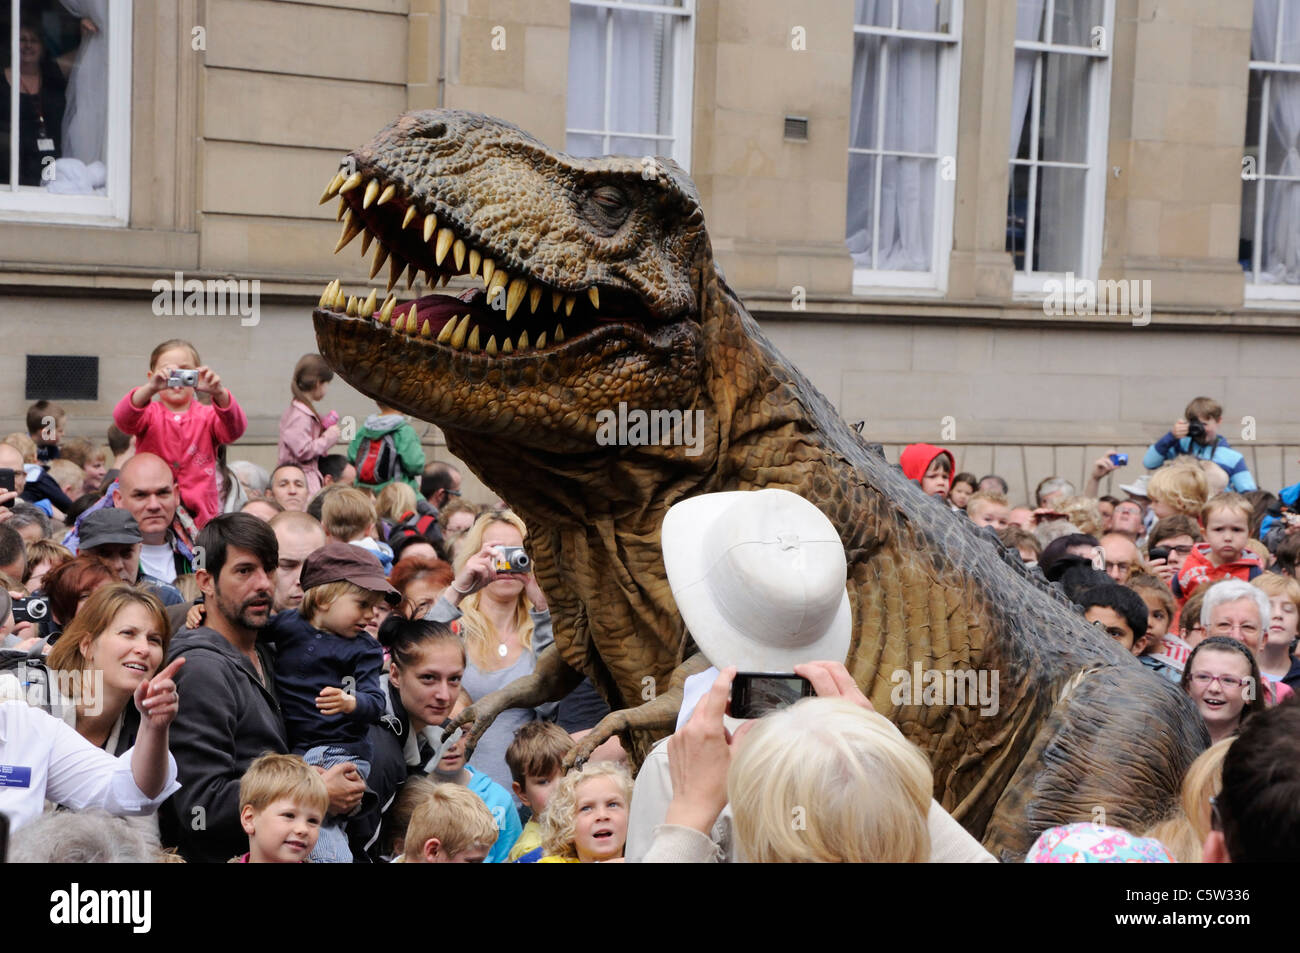 A Tyrannosaurus Rex at the opening celebrations of the new National Museum of Scotland, Edinburgh Stock Photo